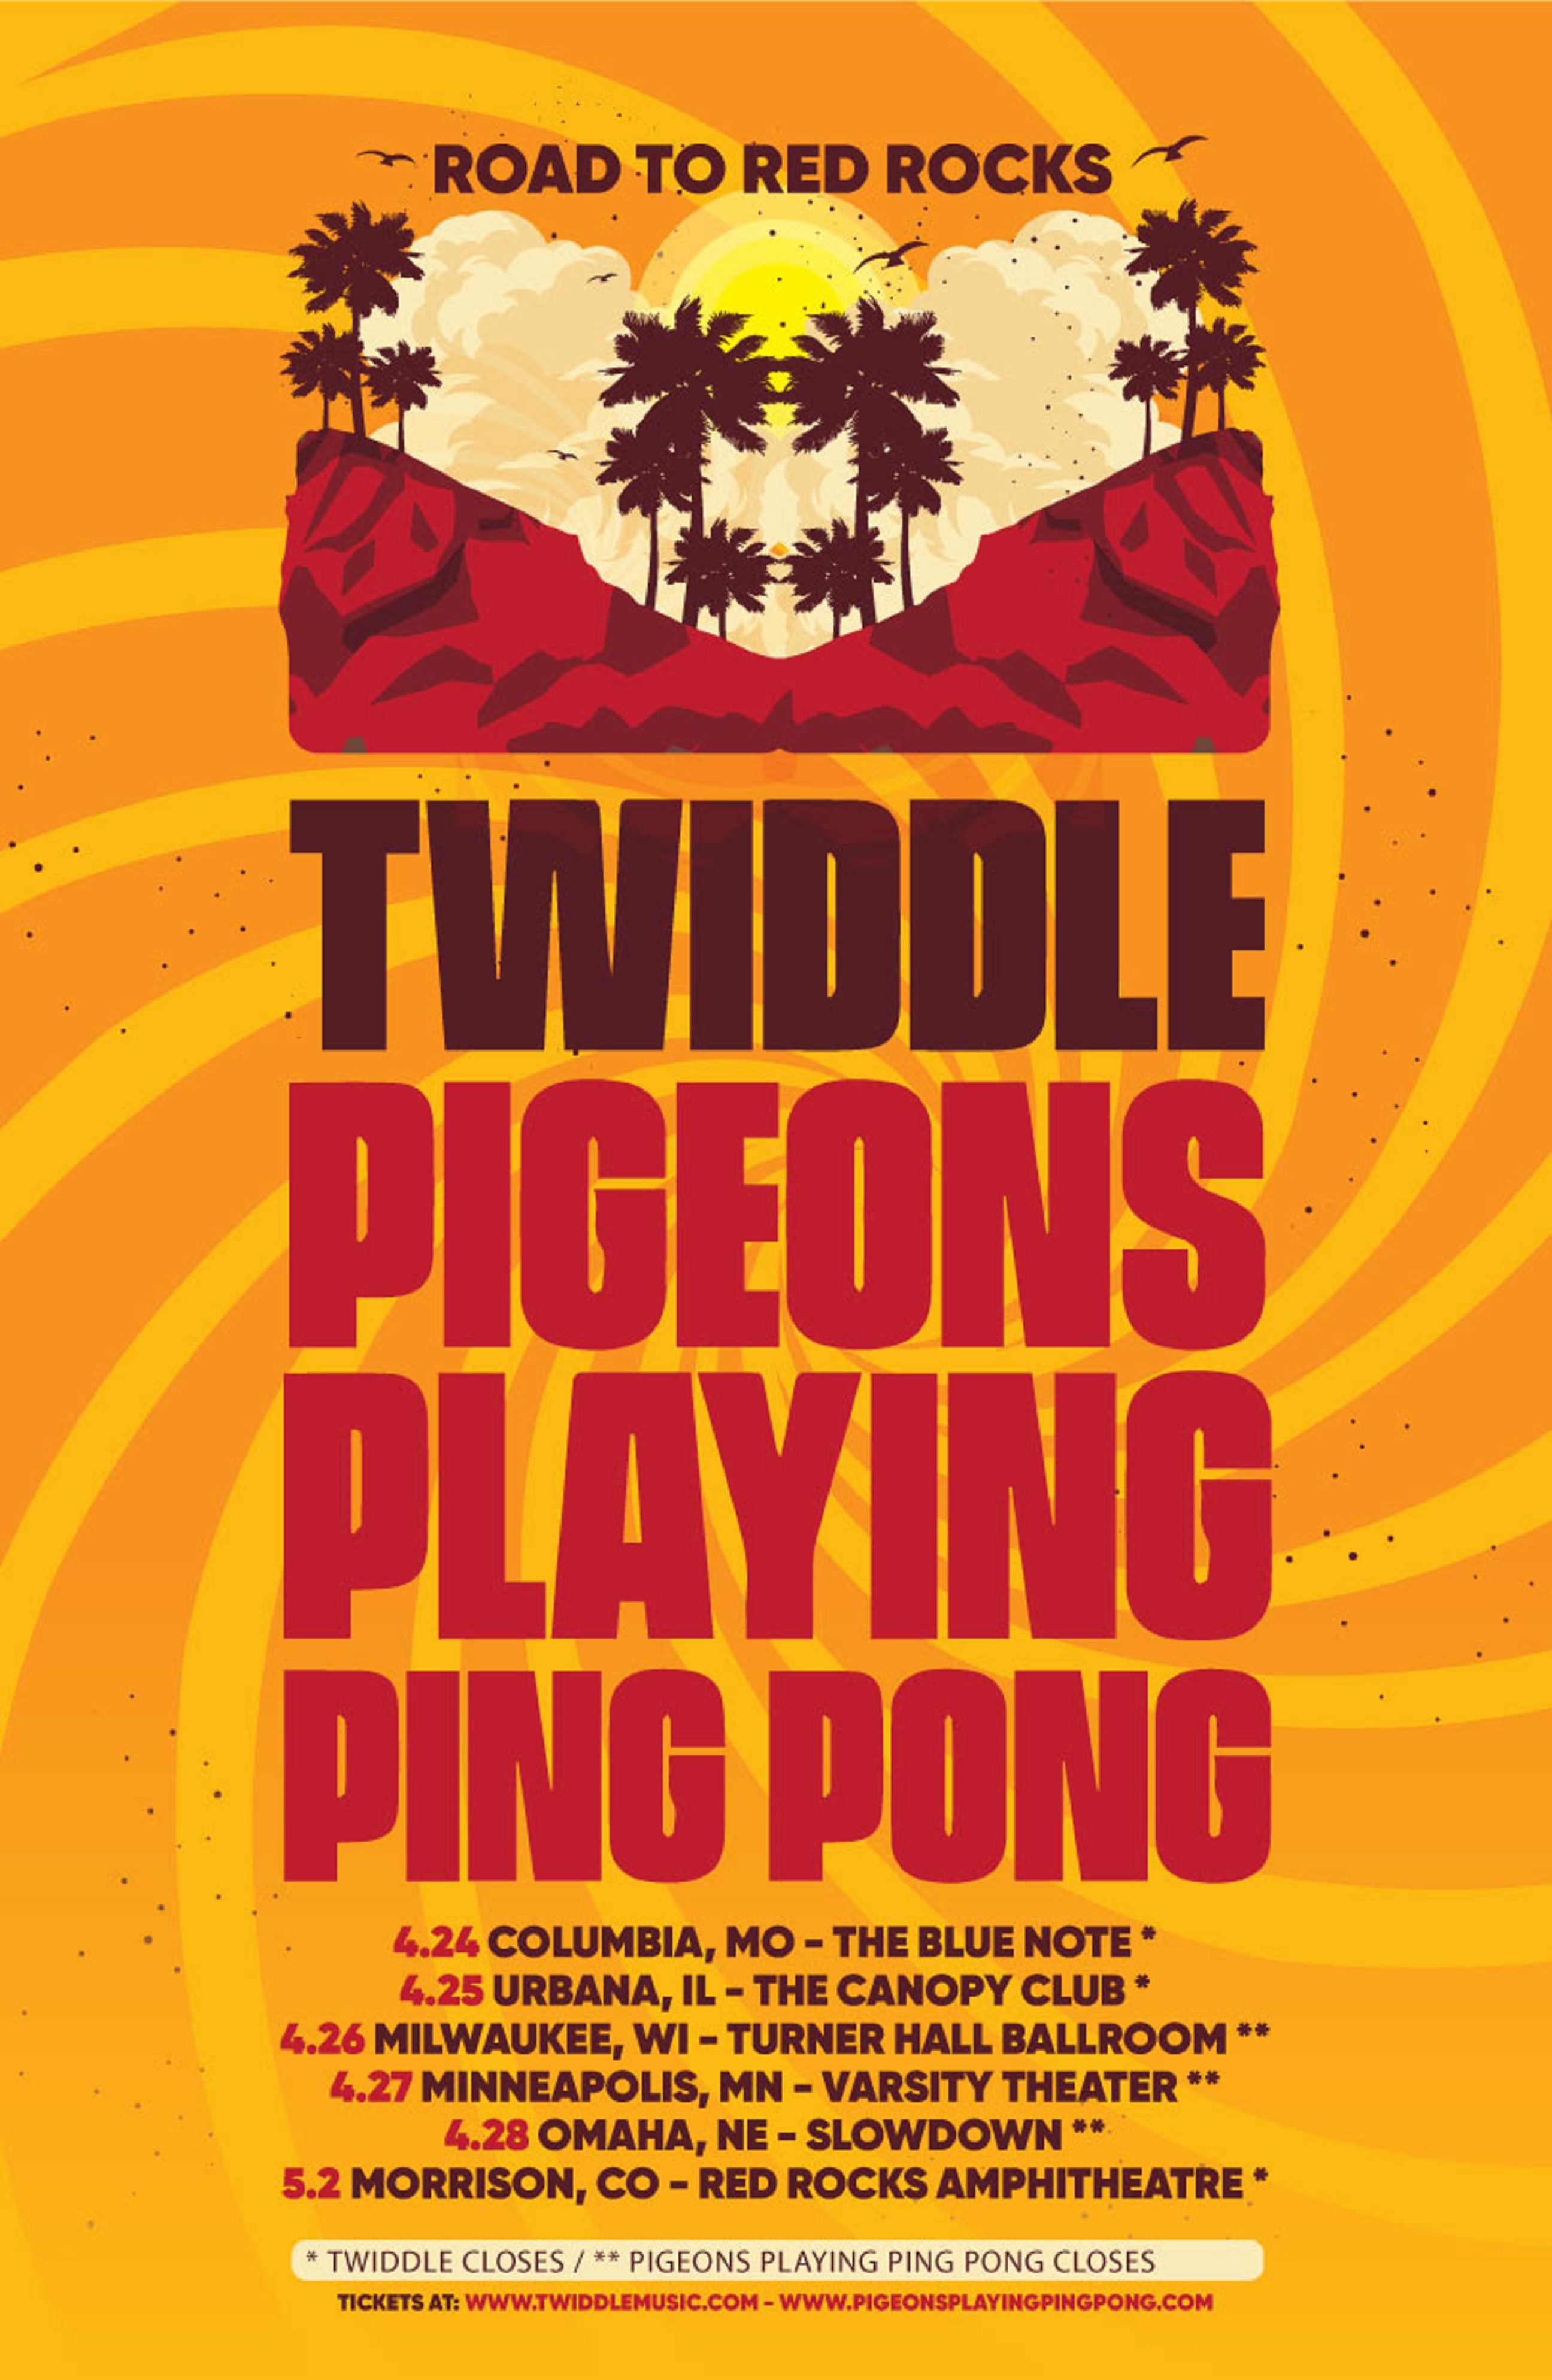 Twiddle & Pigeons Playing Ping Pong Share "Road To Red Rocks" Dates